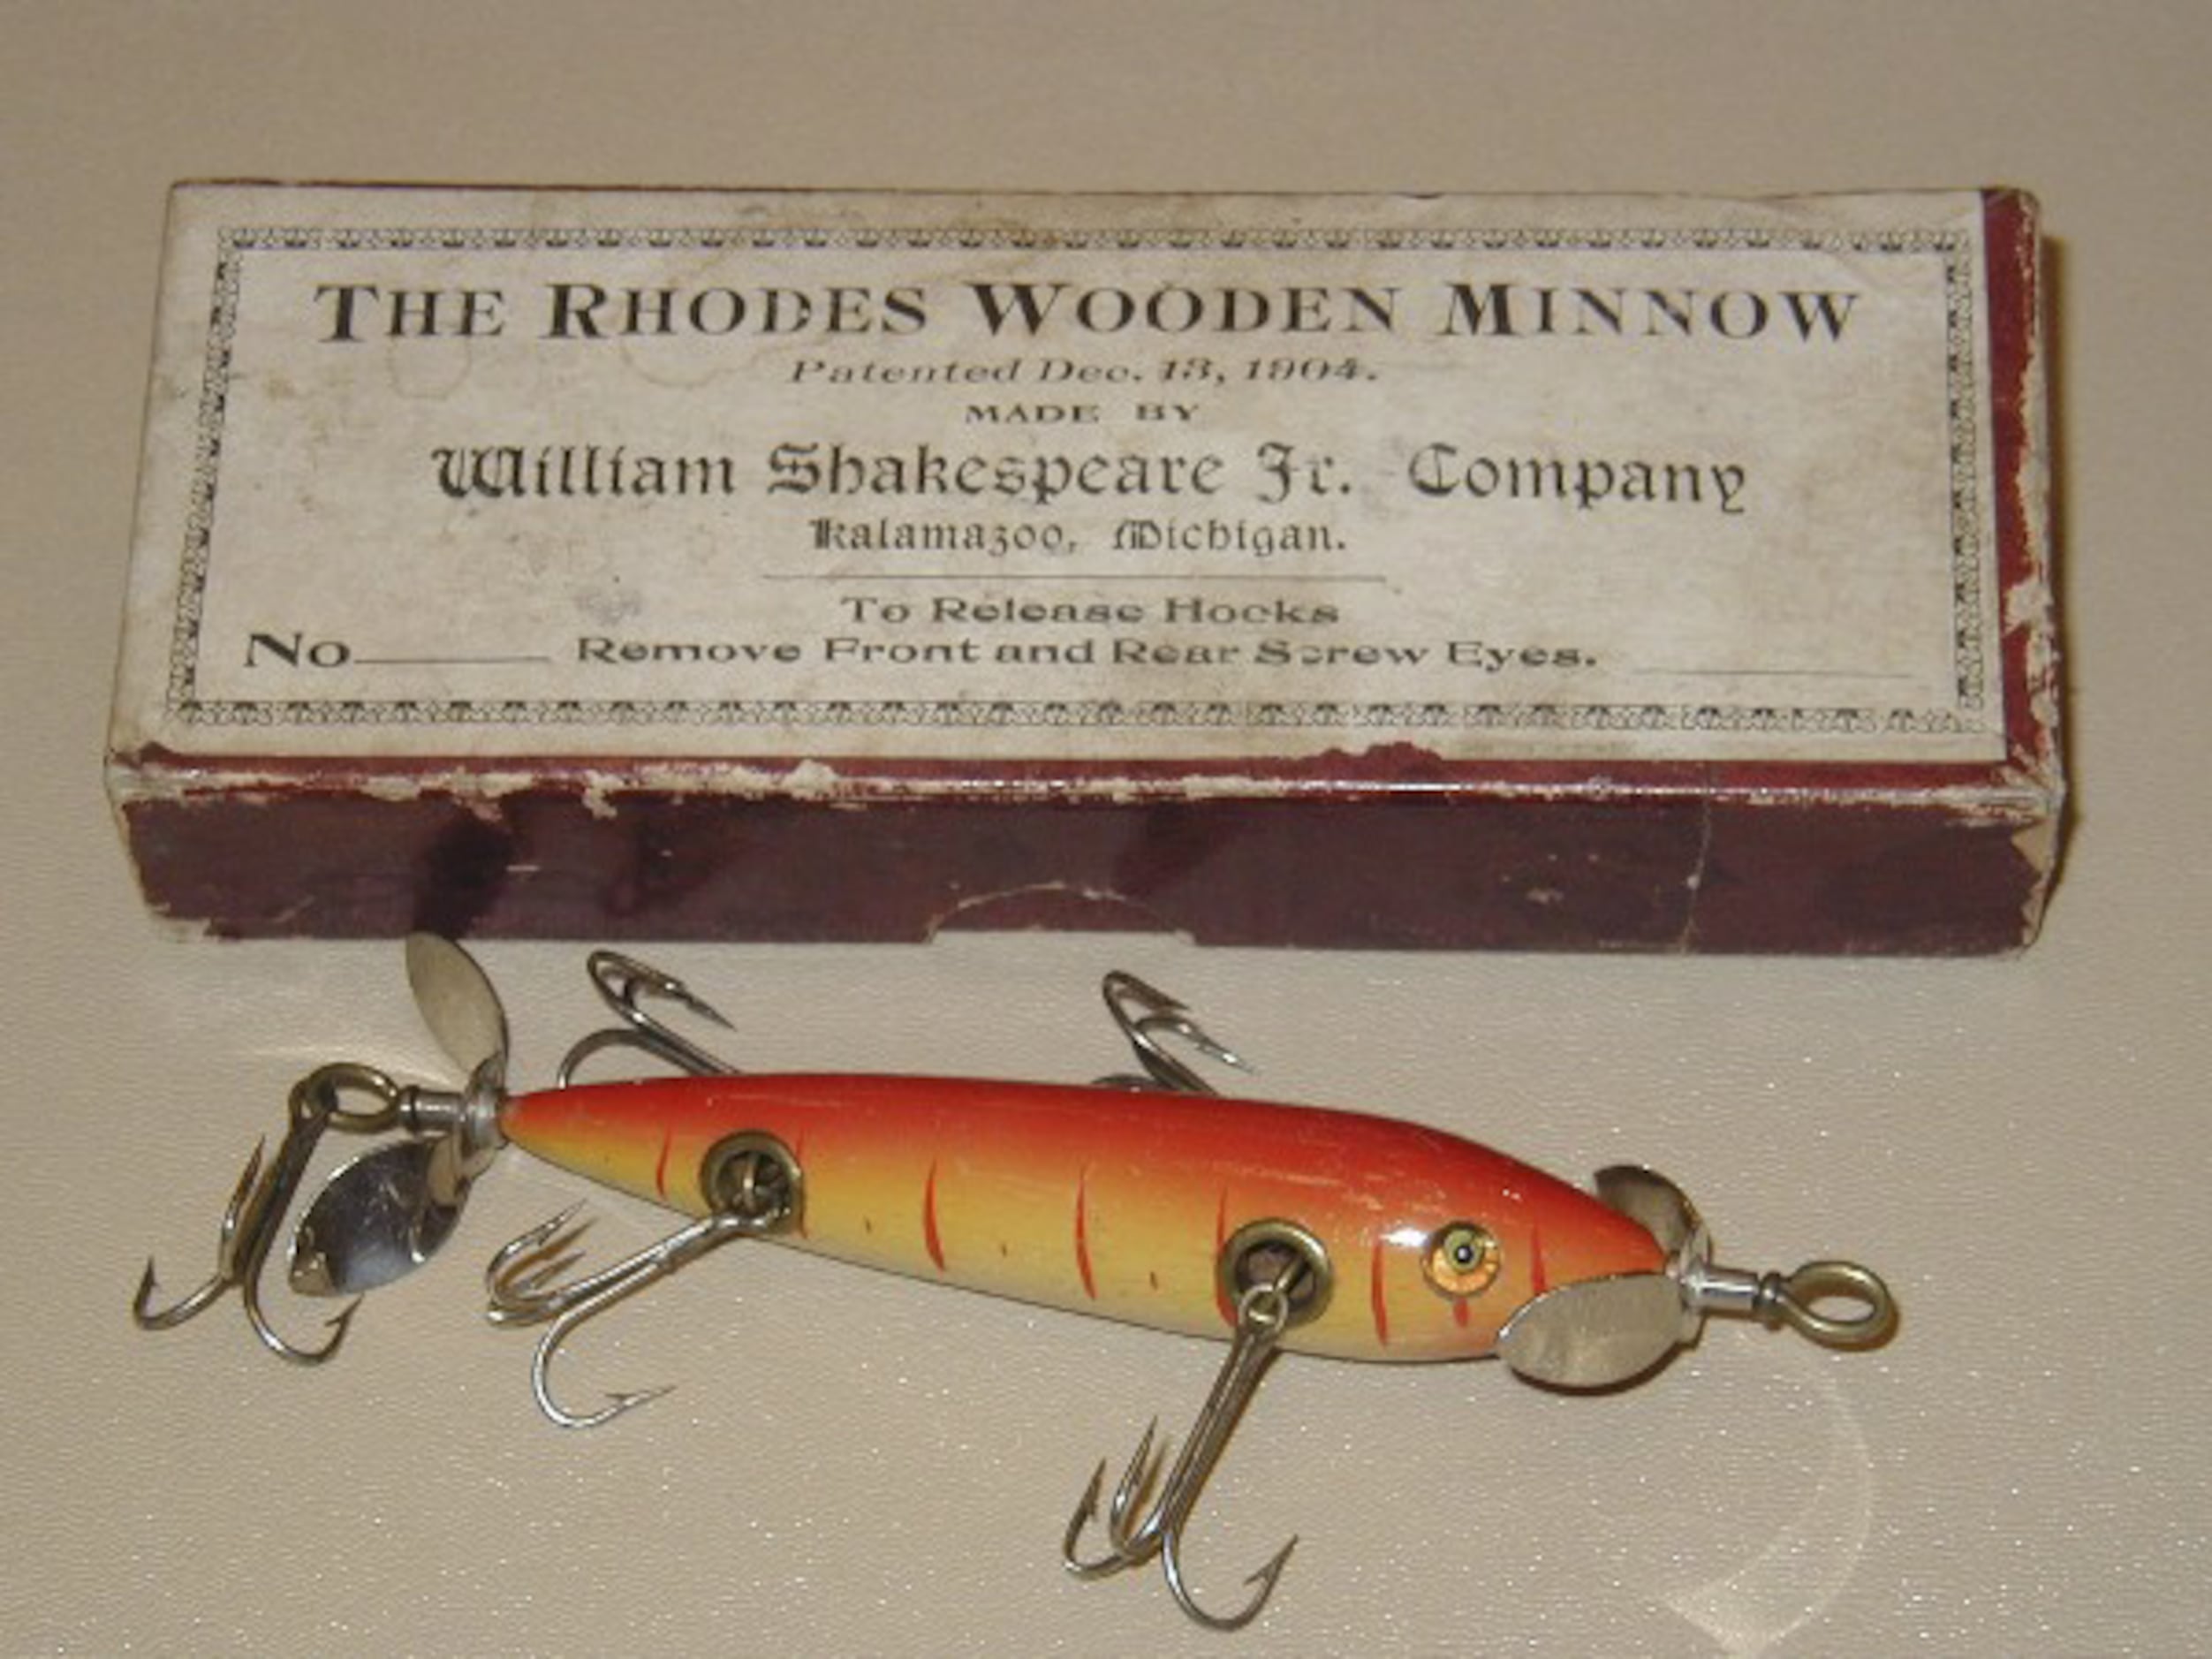 Vintage Bomber Bait Co Gainesville Texas USA fishing lure (lot